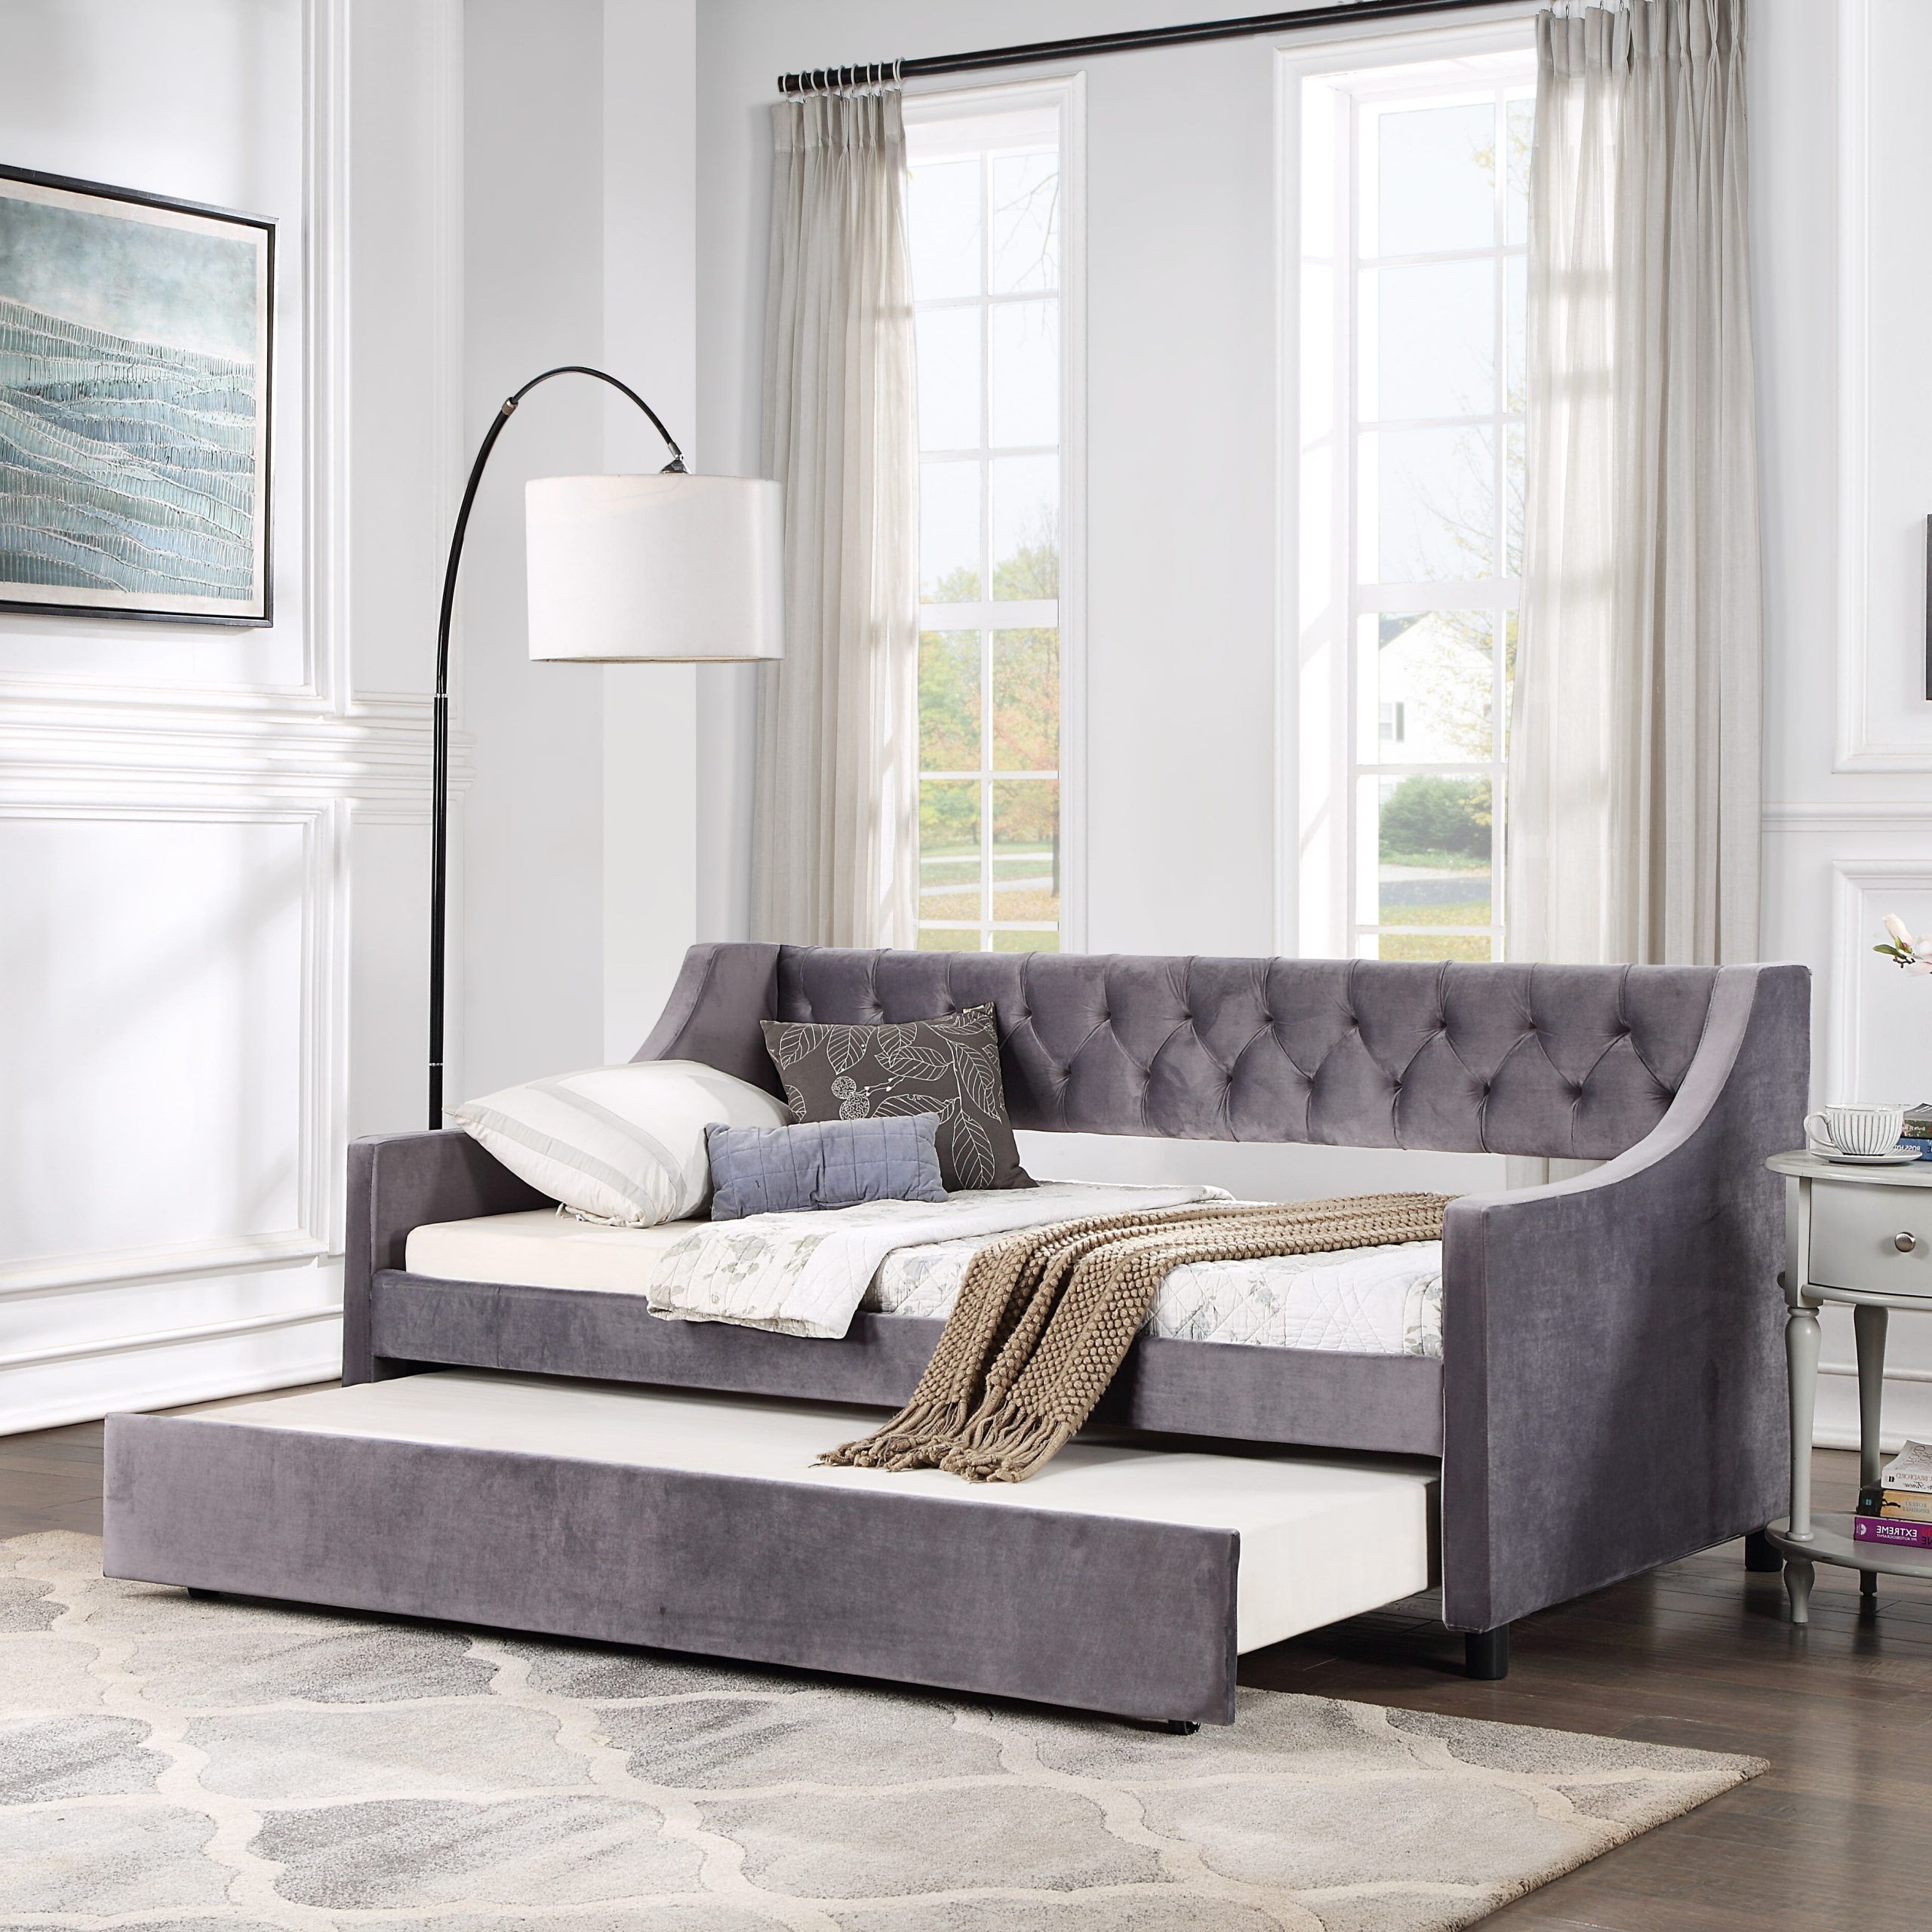 2 In 1 Gray Pull Out Sofa Beds Pertaining To Fashionable Overdrive Pull Out Sofa Bed With Upholstered Tufted Daybed Sleeper Sofa (View 2 of 15)